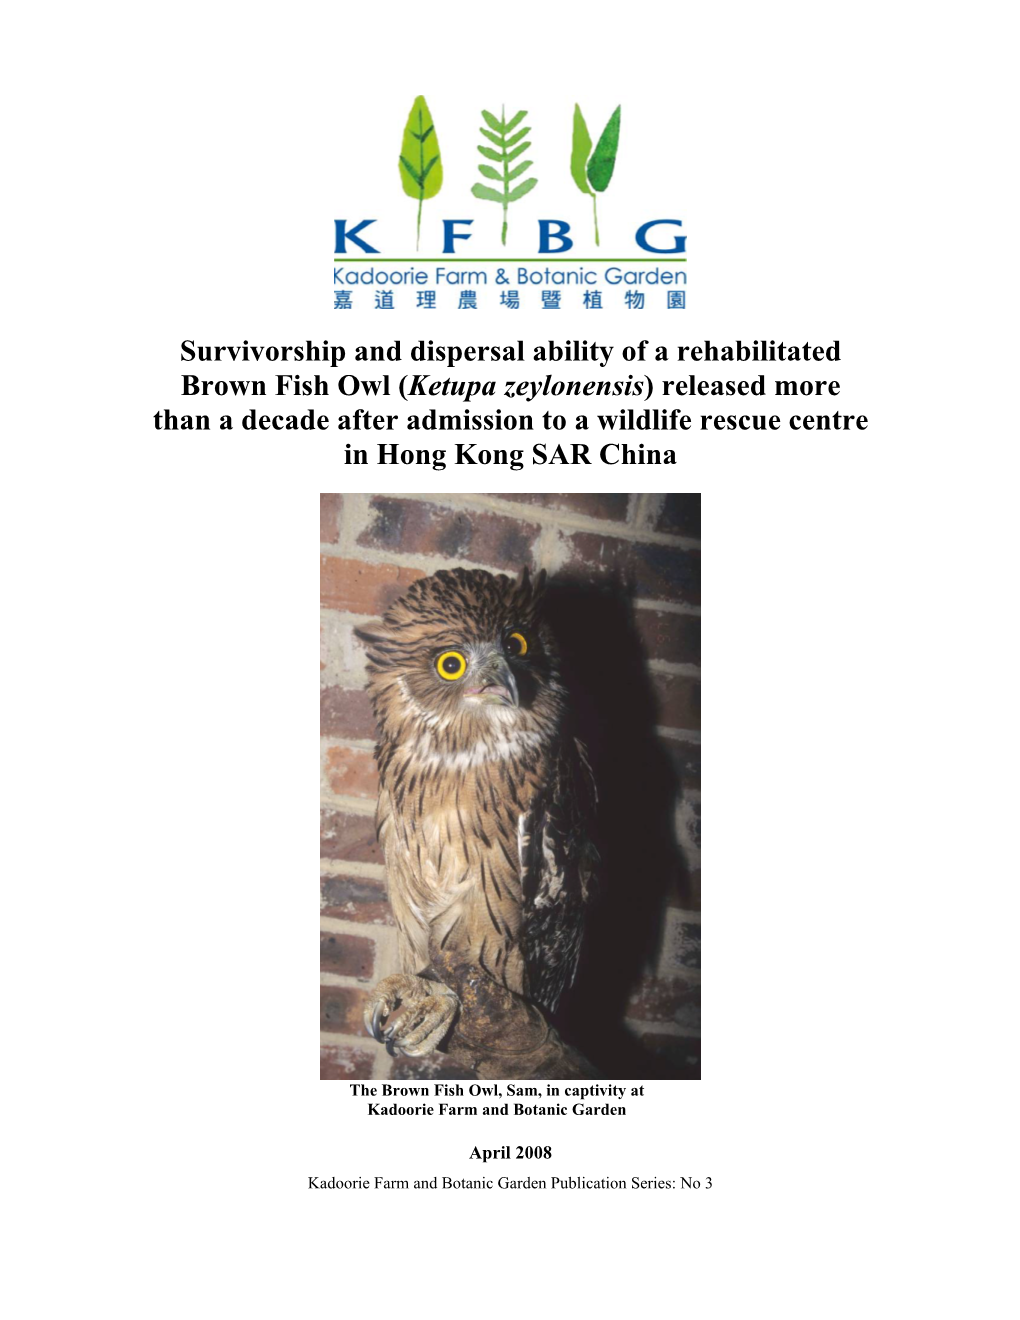 Ketupa Zeylonensis) Released More Than a Decade After Admission to a Wildlife Rescue Centre in Hong Kong SAR China